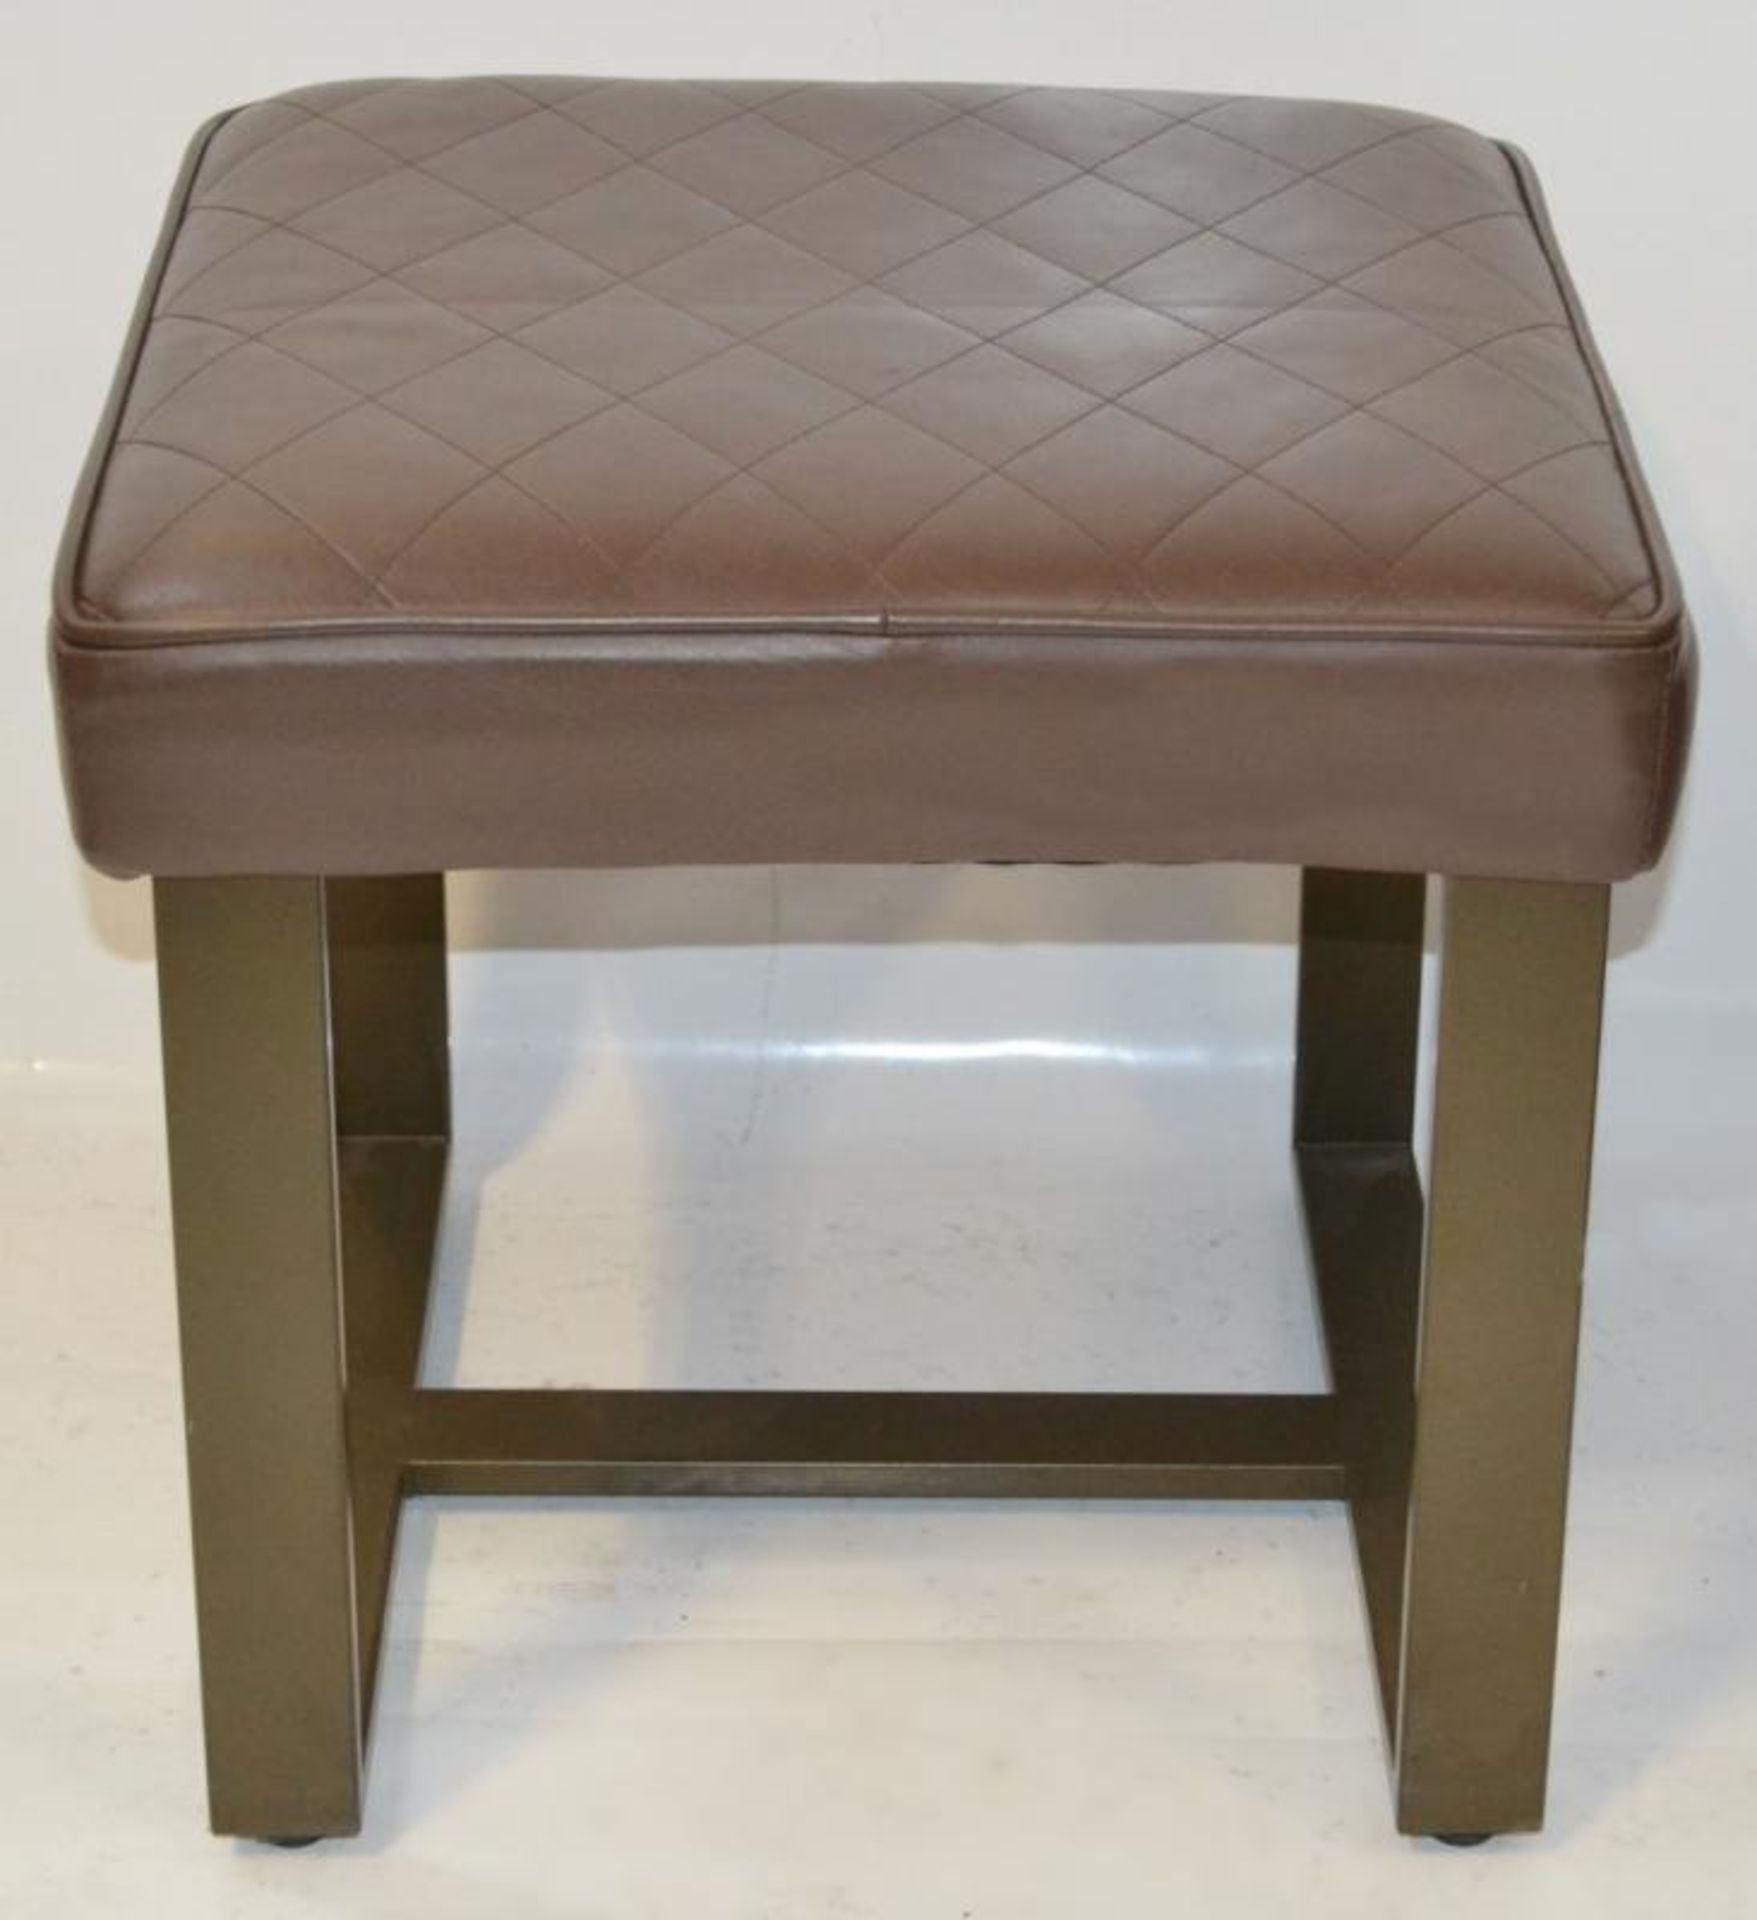 8 x Contemporary Seat Stools With Brown Faux Leather Cushioned Seat Pads - Recently Removed From - Image 5 of 6